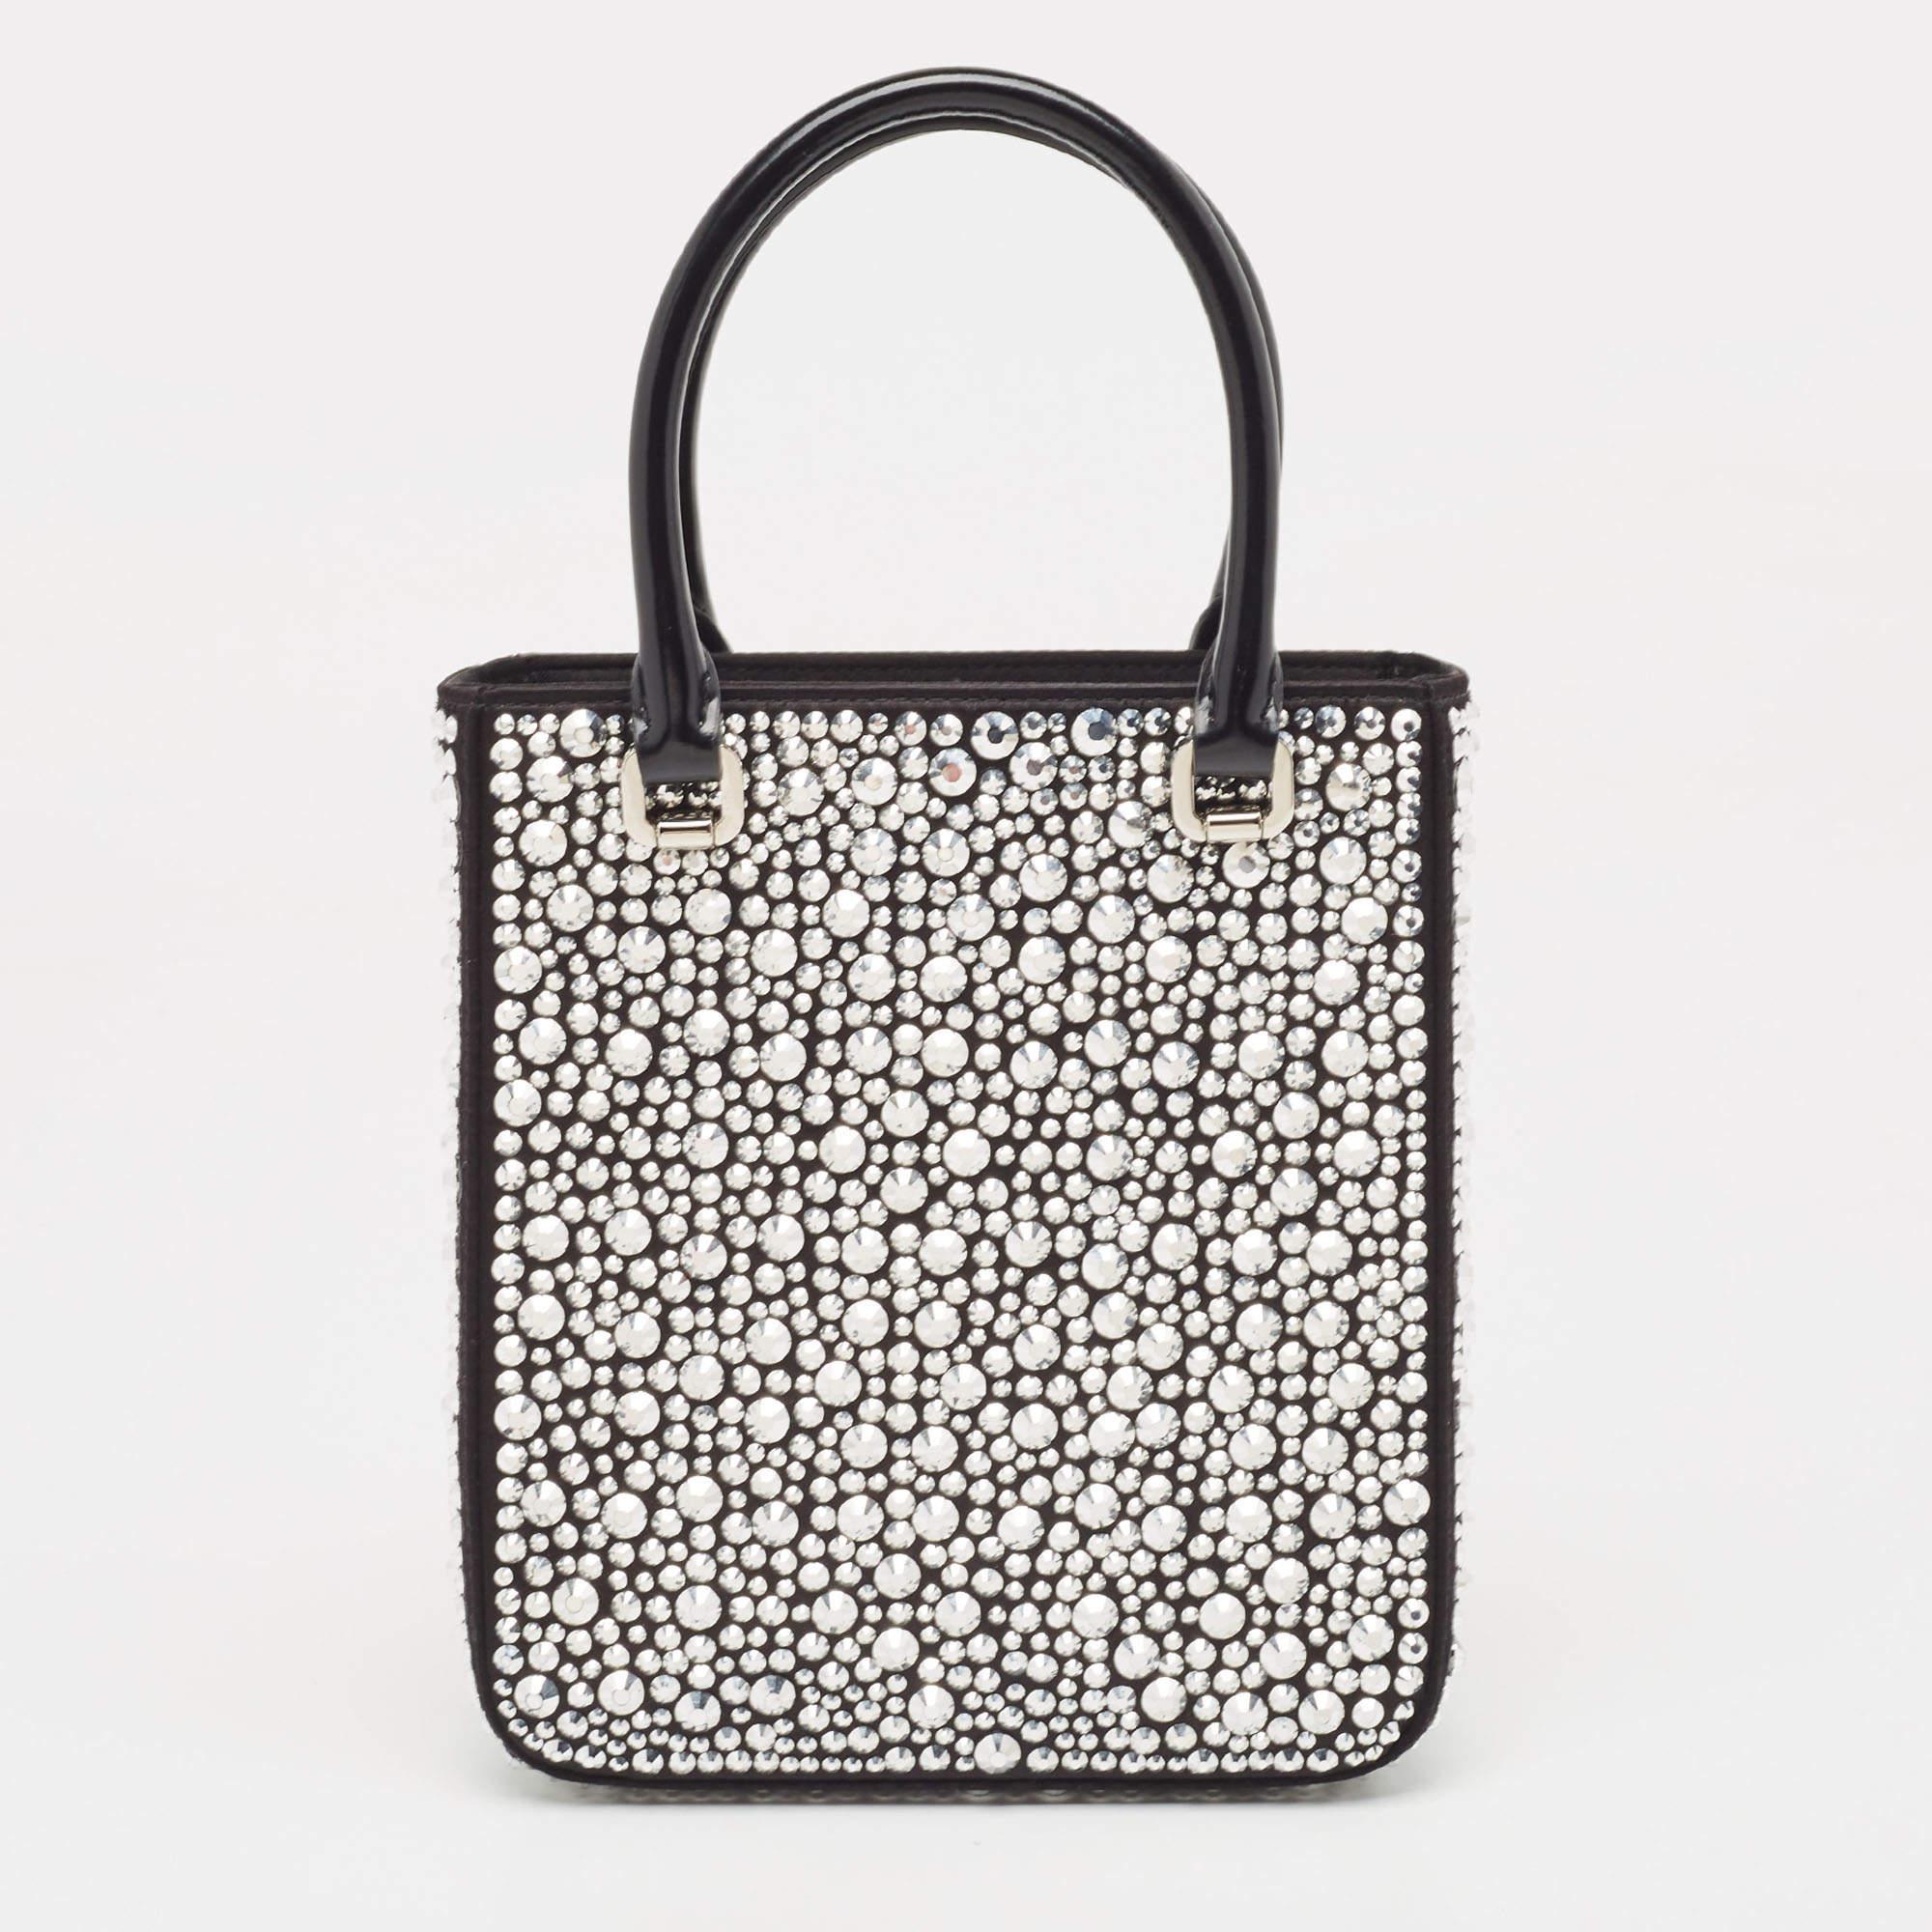 Prada Black Satin and Leather Small Crystal Embellished Tote For Sale 4